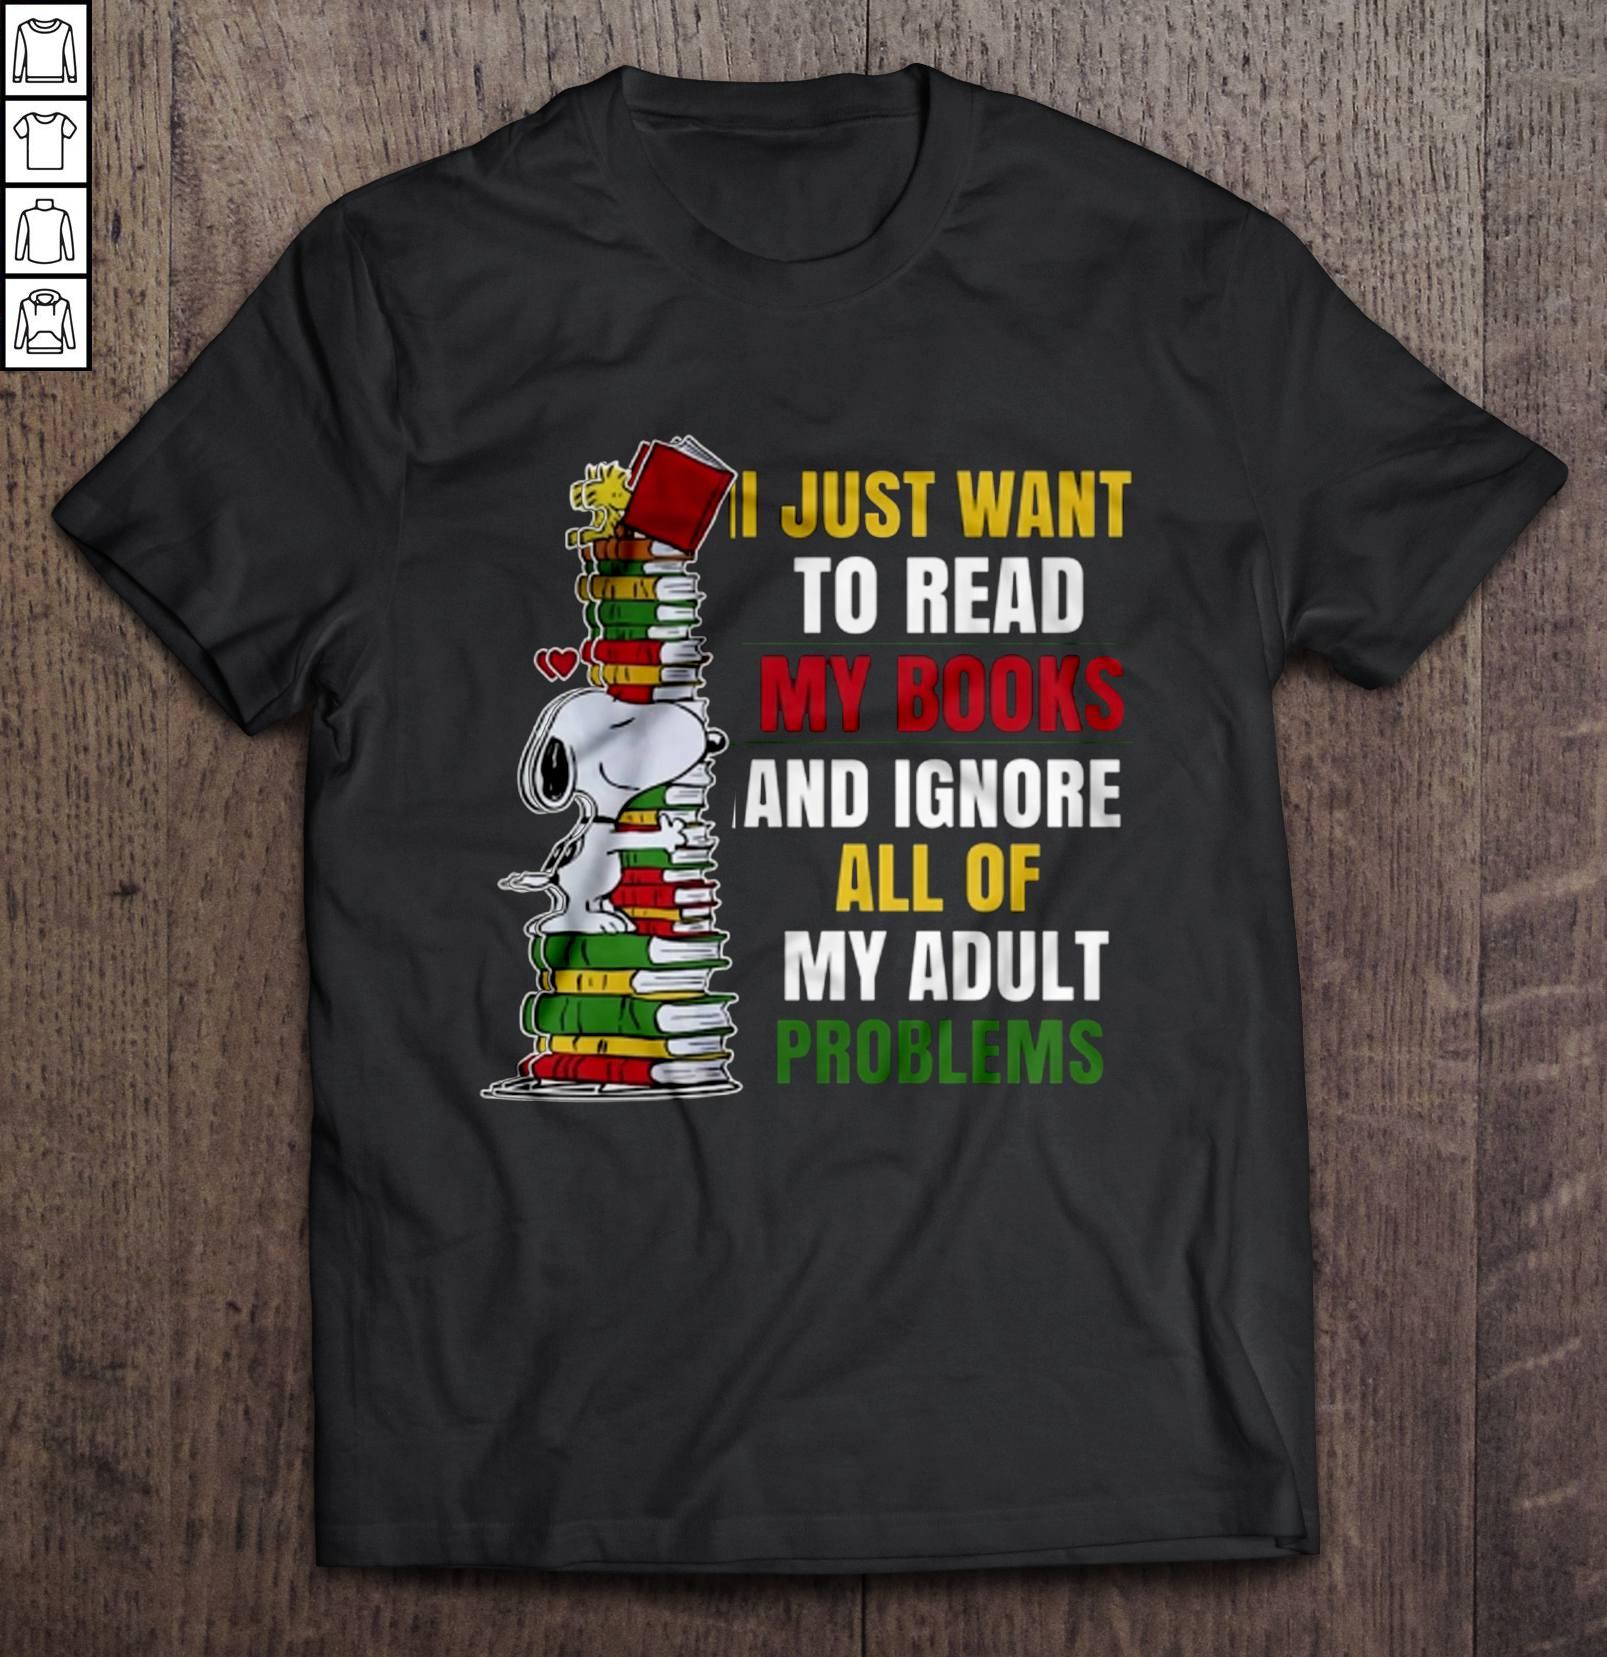 I Just Want To Read My Books And Ignore All Of My Adult Problems Tee T-Shirt